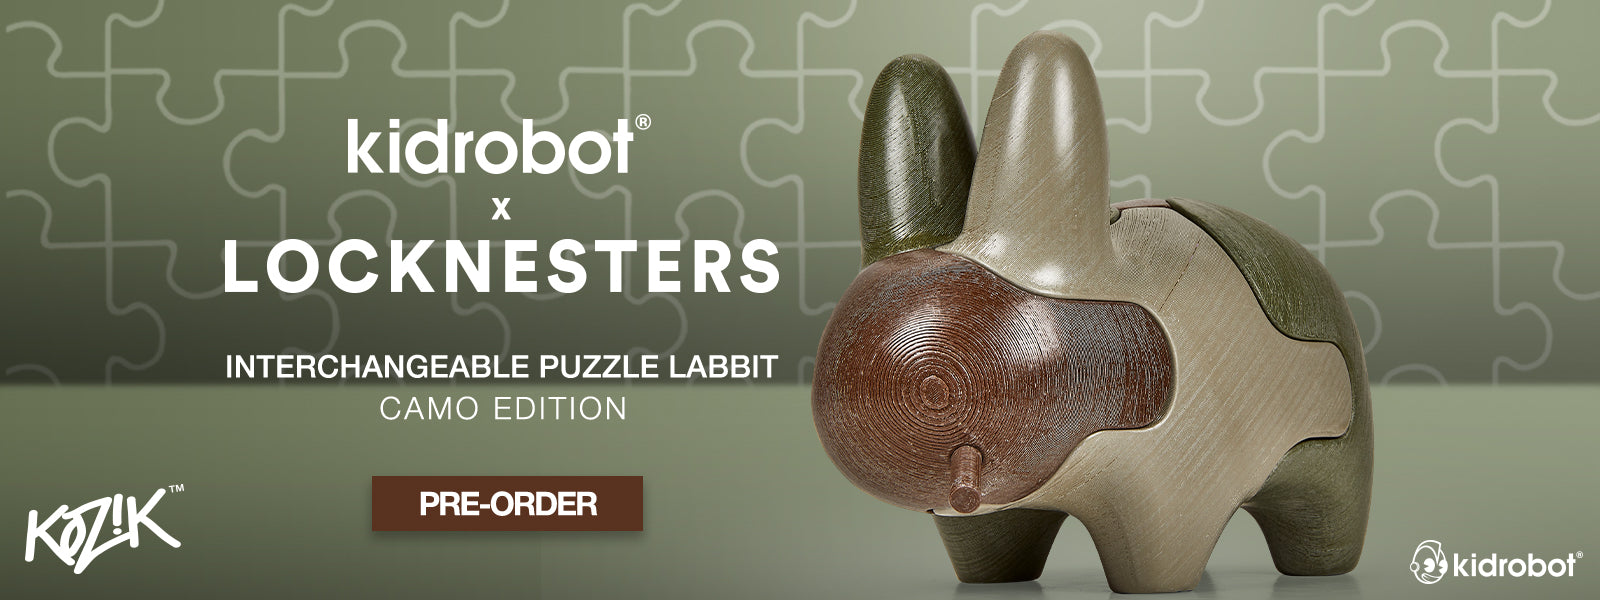 Kidrobot x Locknesters x Frank Kozik Puzzle Labbit - Camo Edition - Pre-order for a limited time only on Kidrobot.com